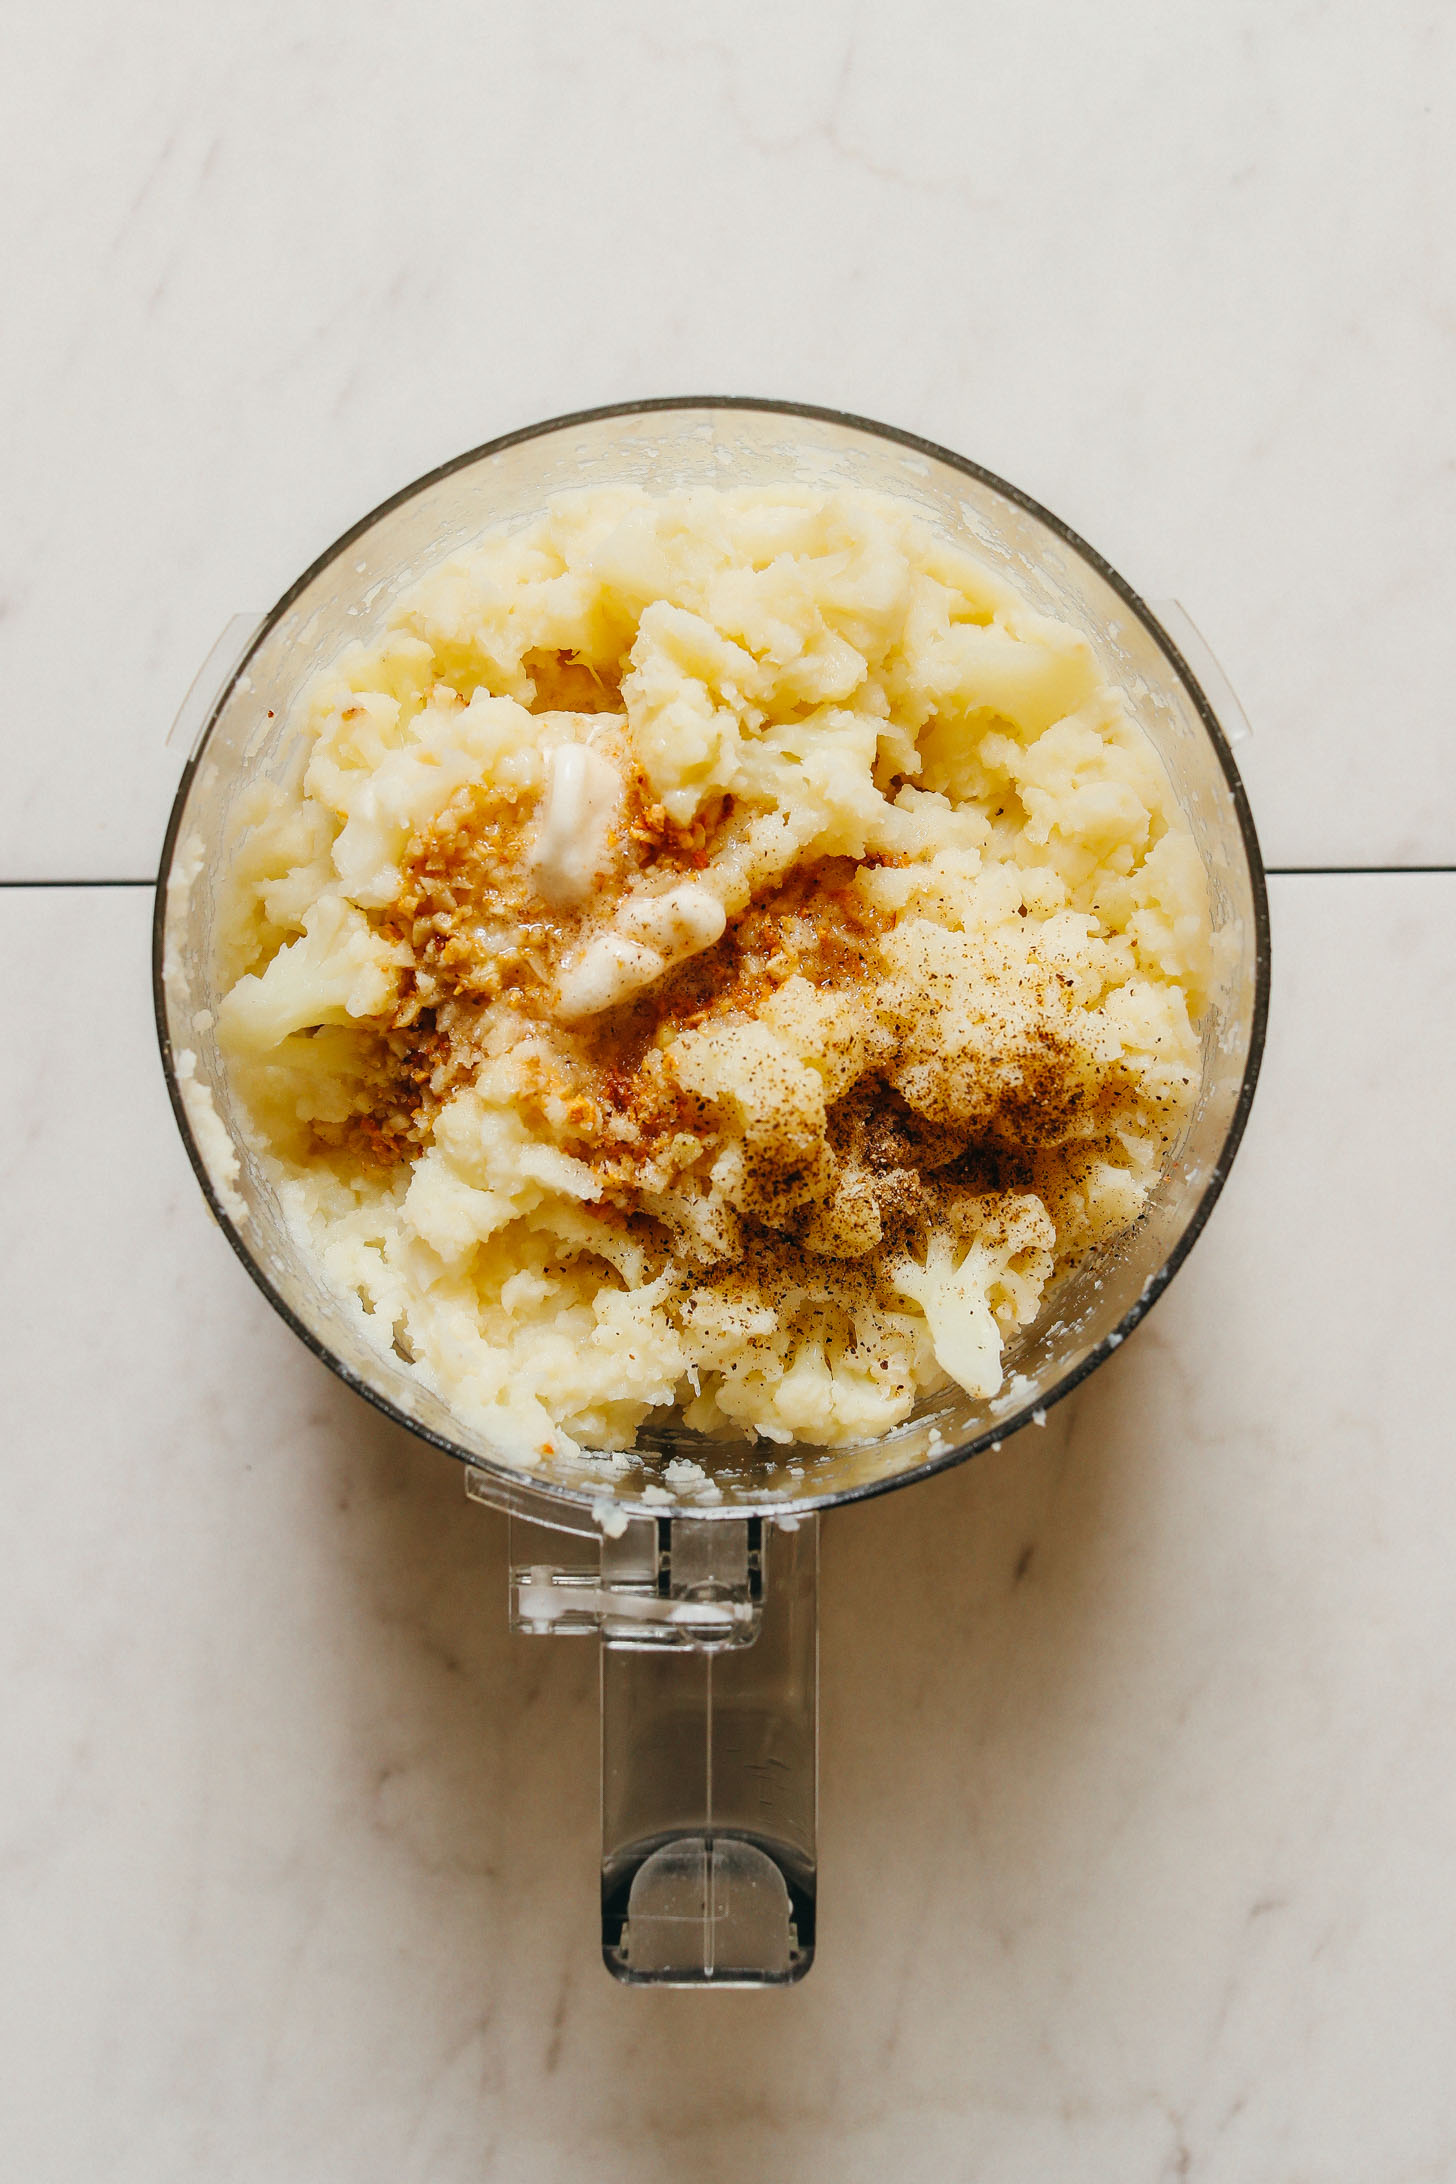 Food processor with mashed cauliflower, spices, and vegan butter for a delicious vegan Thanksgiving side recipe